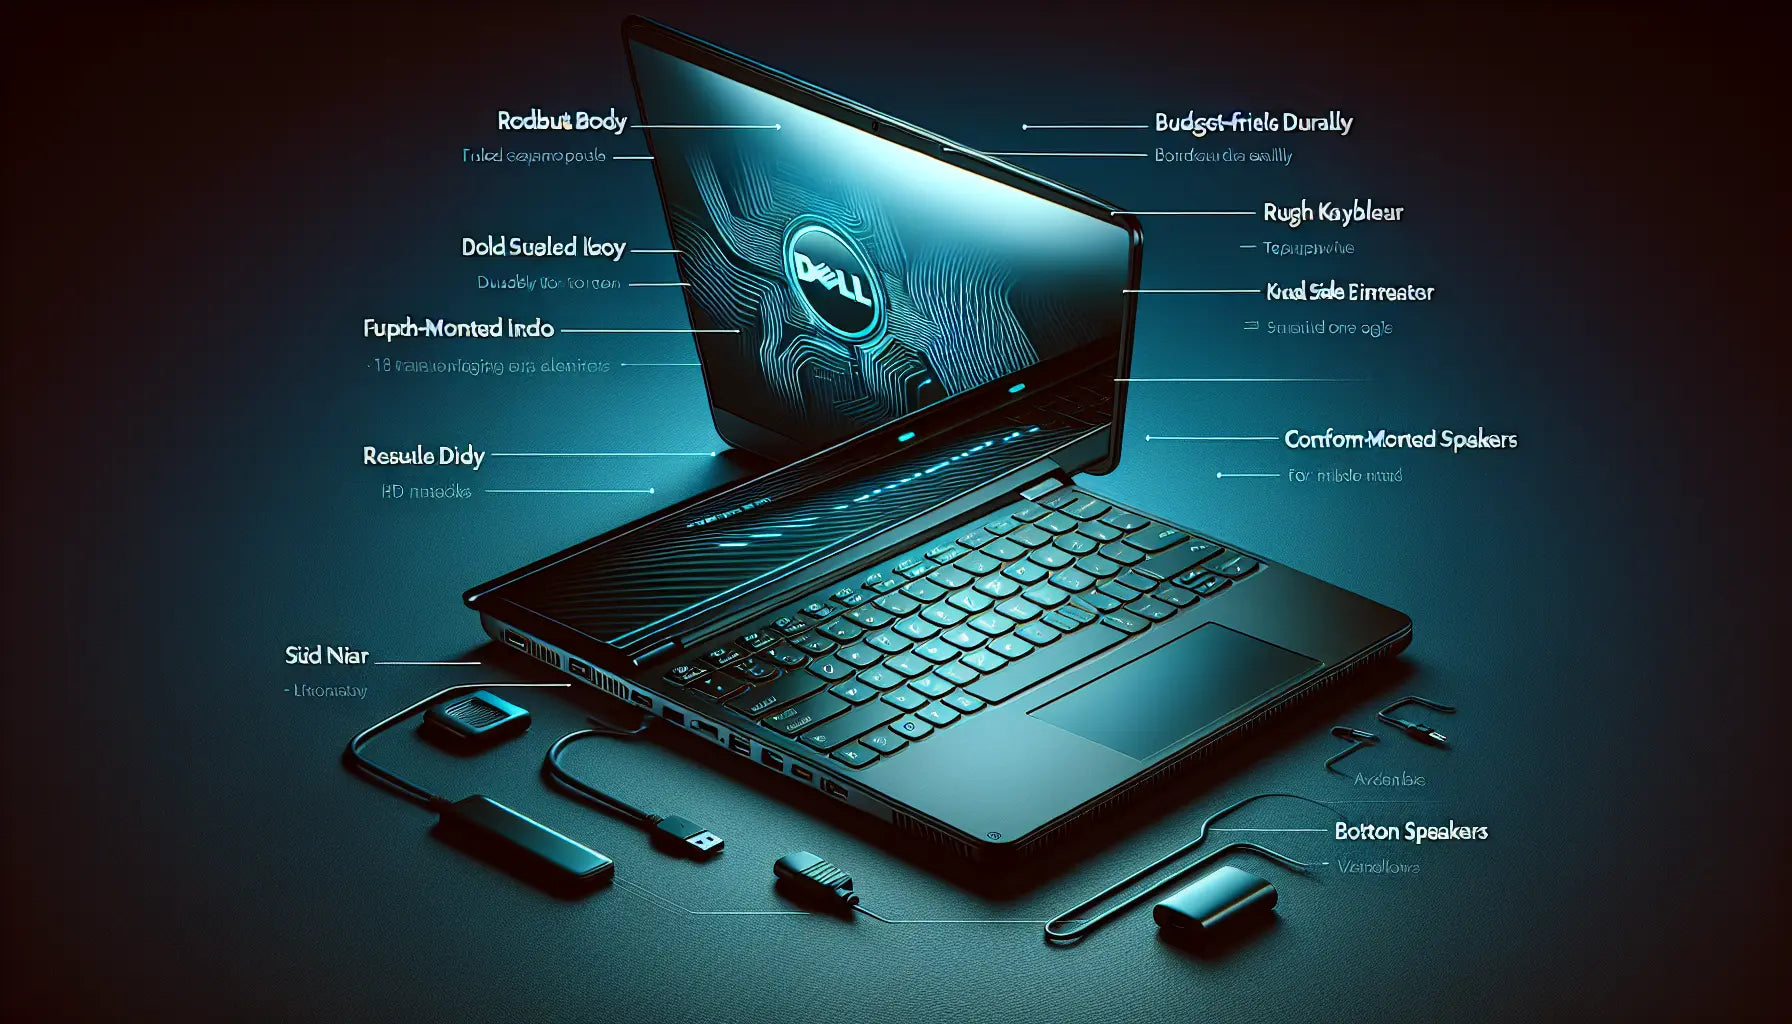 Discover the Dell LATITUDE 5490 I5, 7th Gen 256GB, 8GB Ram Laptop: A Budget-Friendly Powerhouse